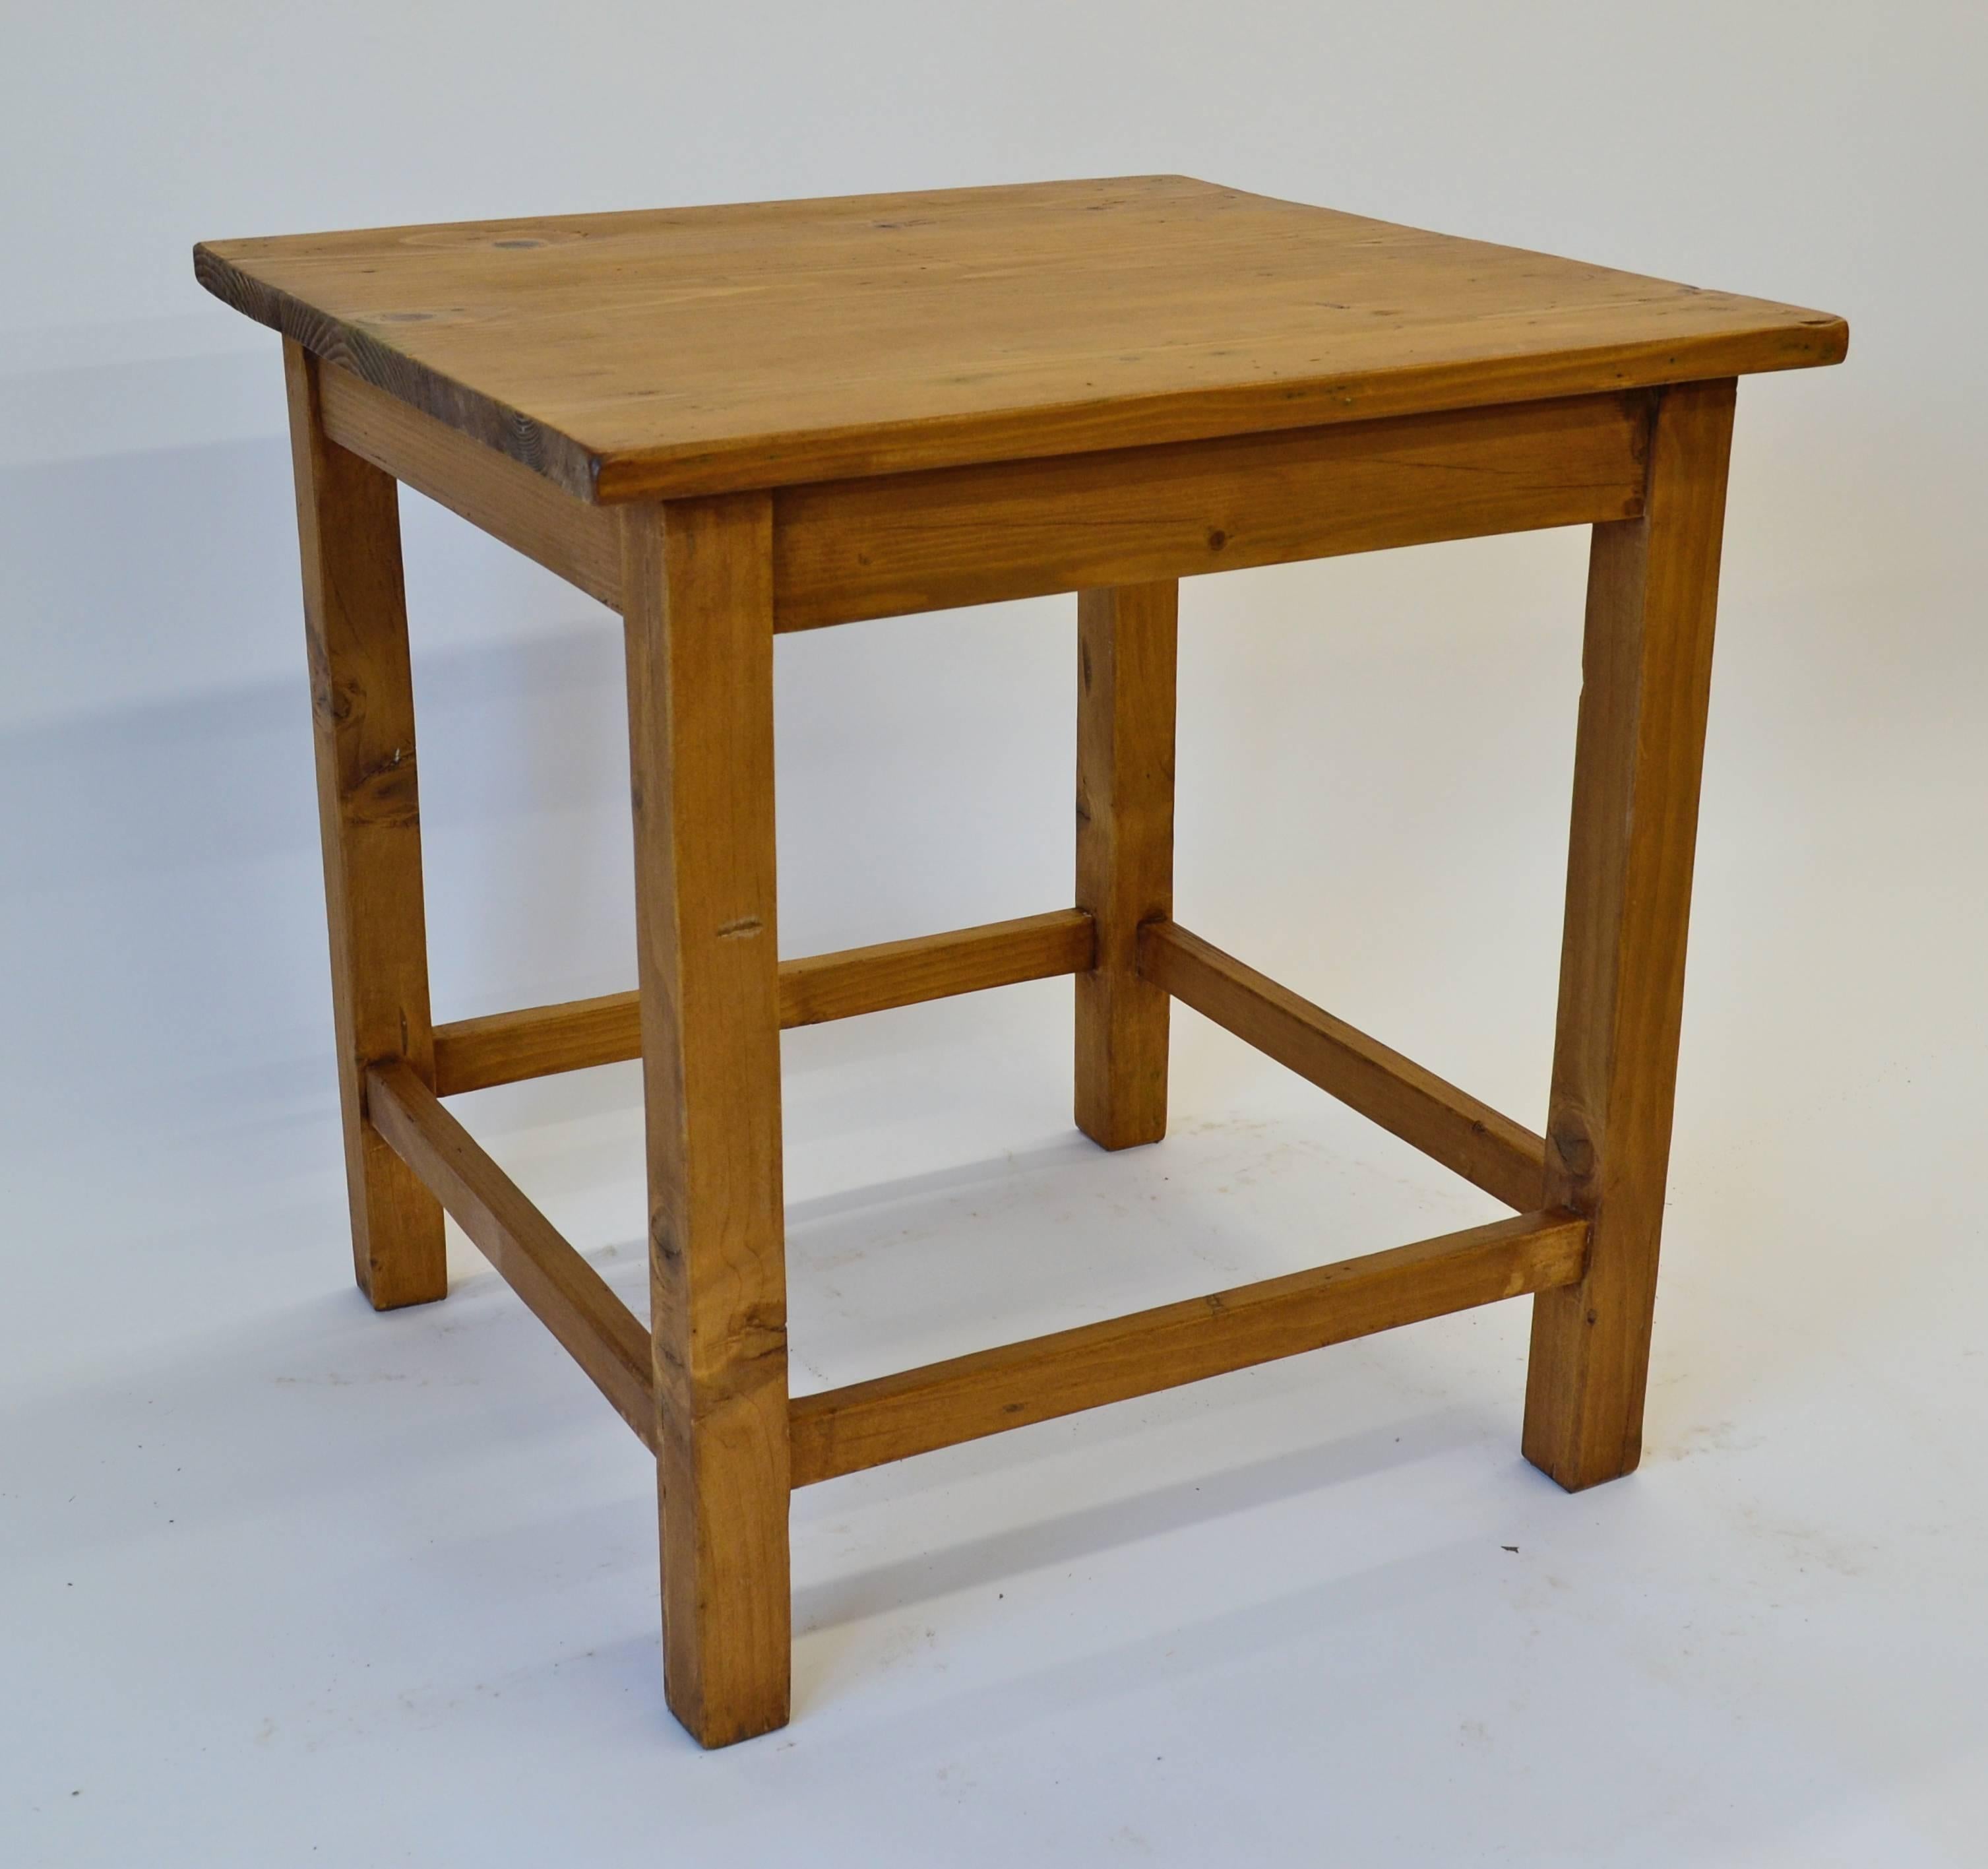 A rustic pine stretcher-base end table on straight legs and with approximately cubed dimensions Very attractive natural distress all-over and great warm color.